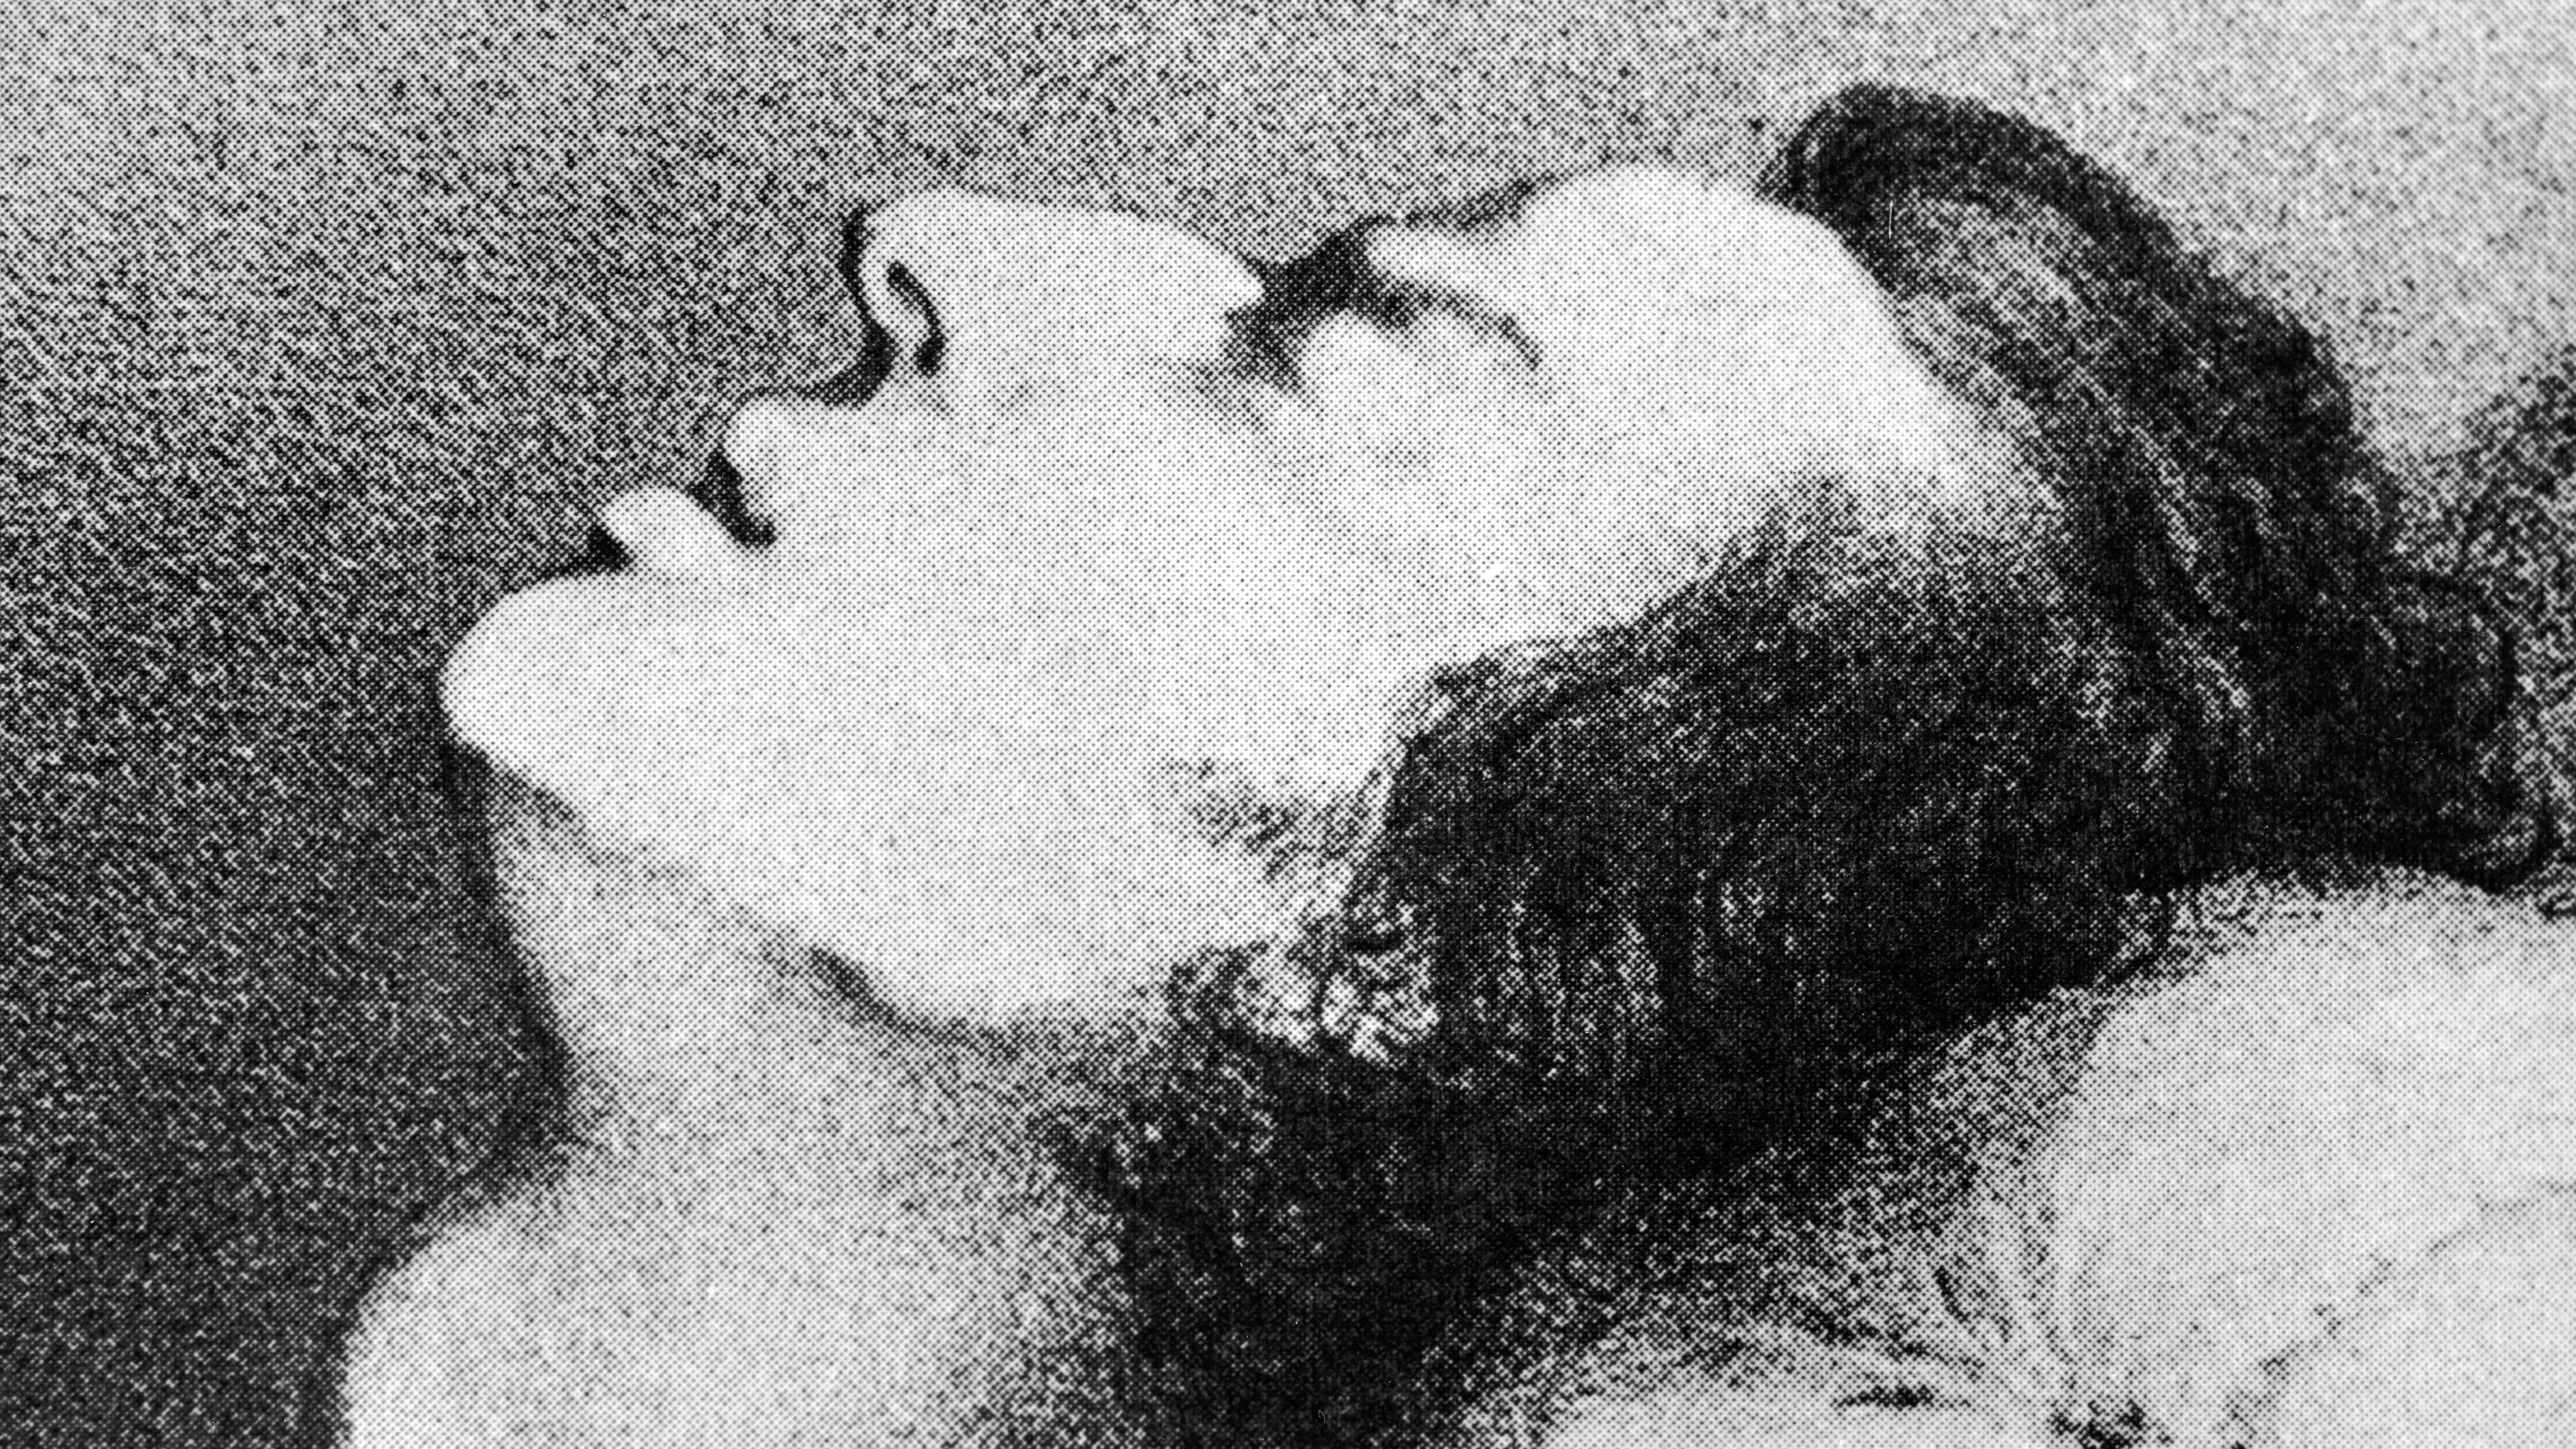 A drawing of Polish-born composer and pianist Frederic Chopin on his deathbed in 1849.